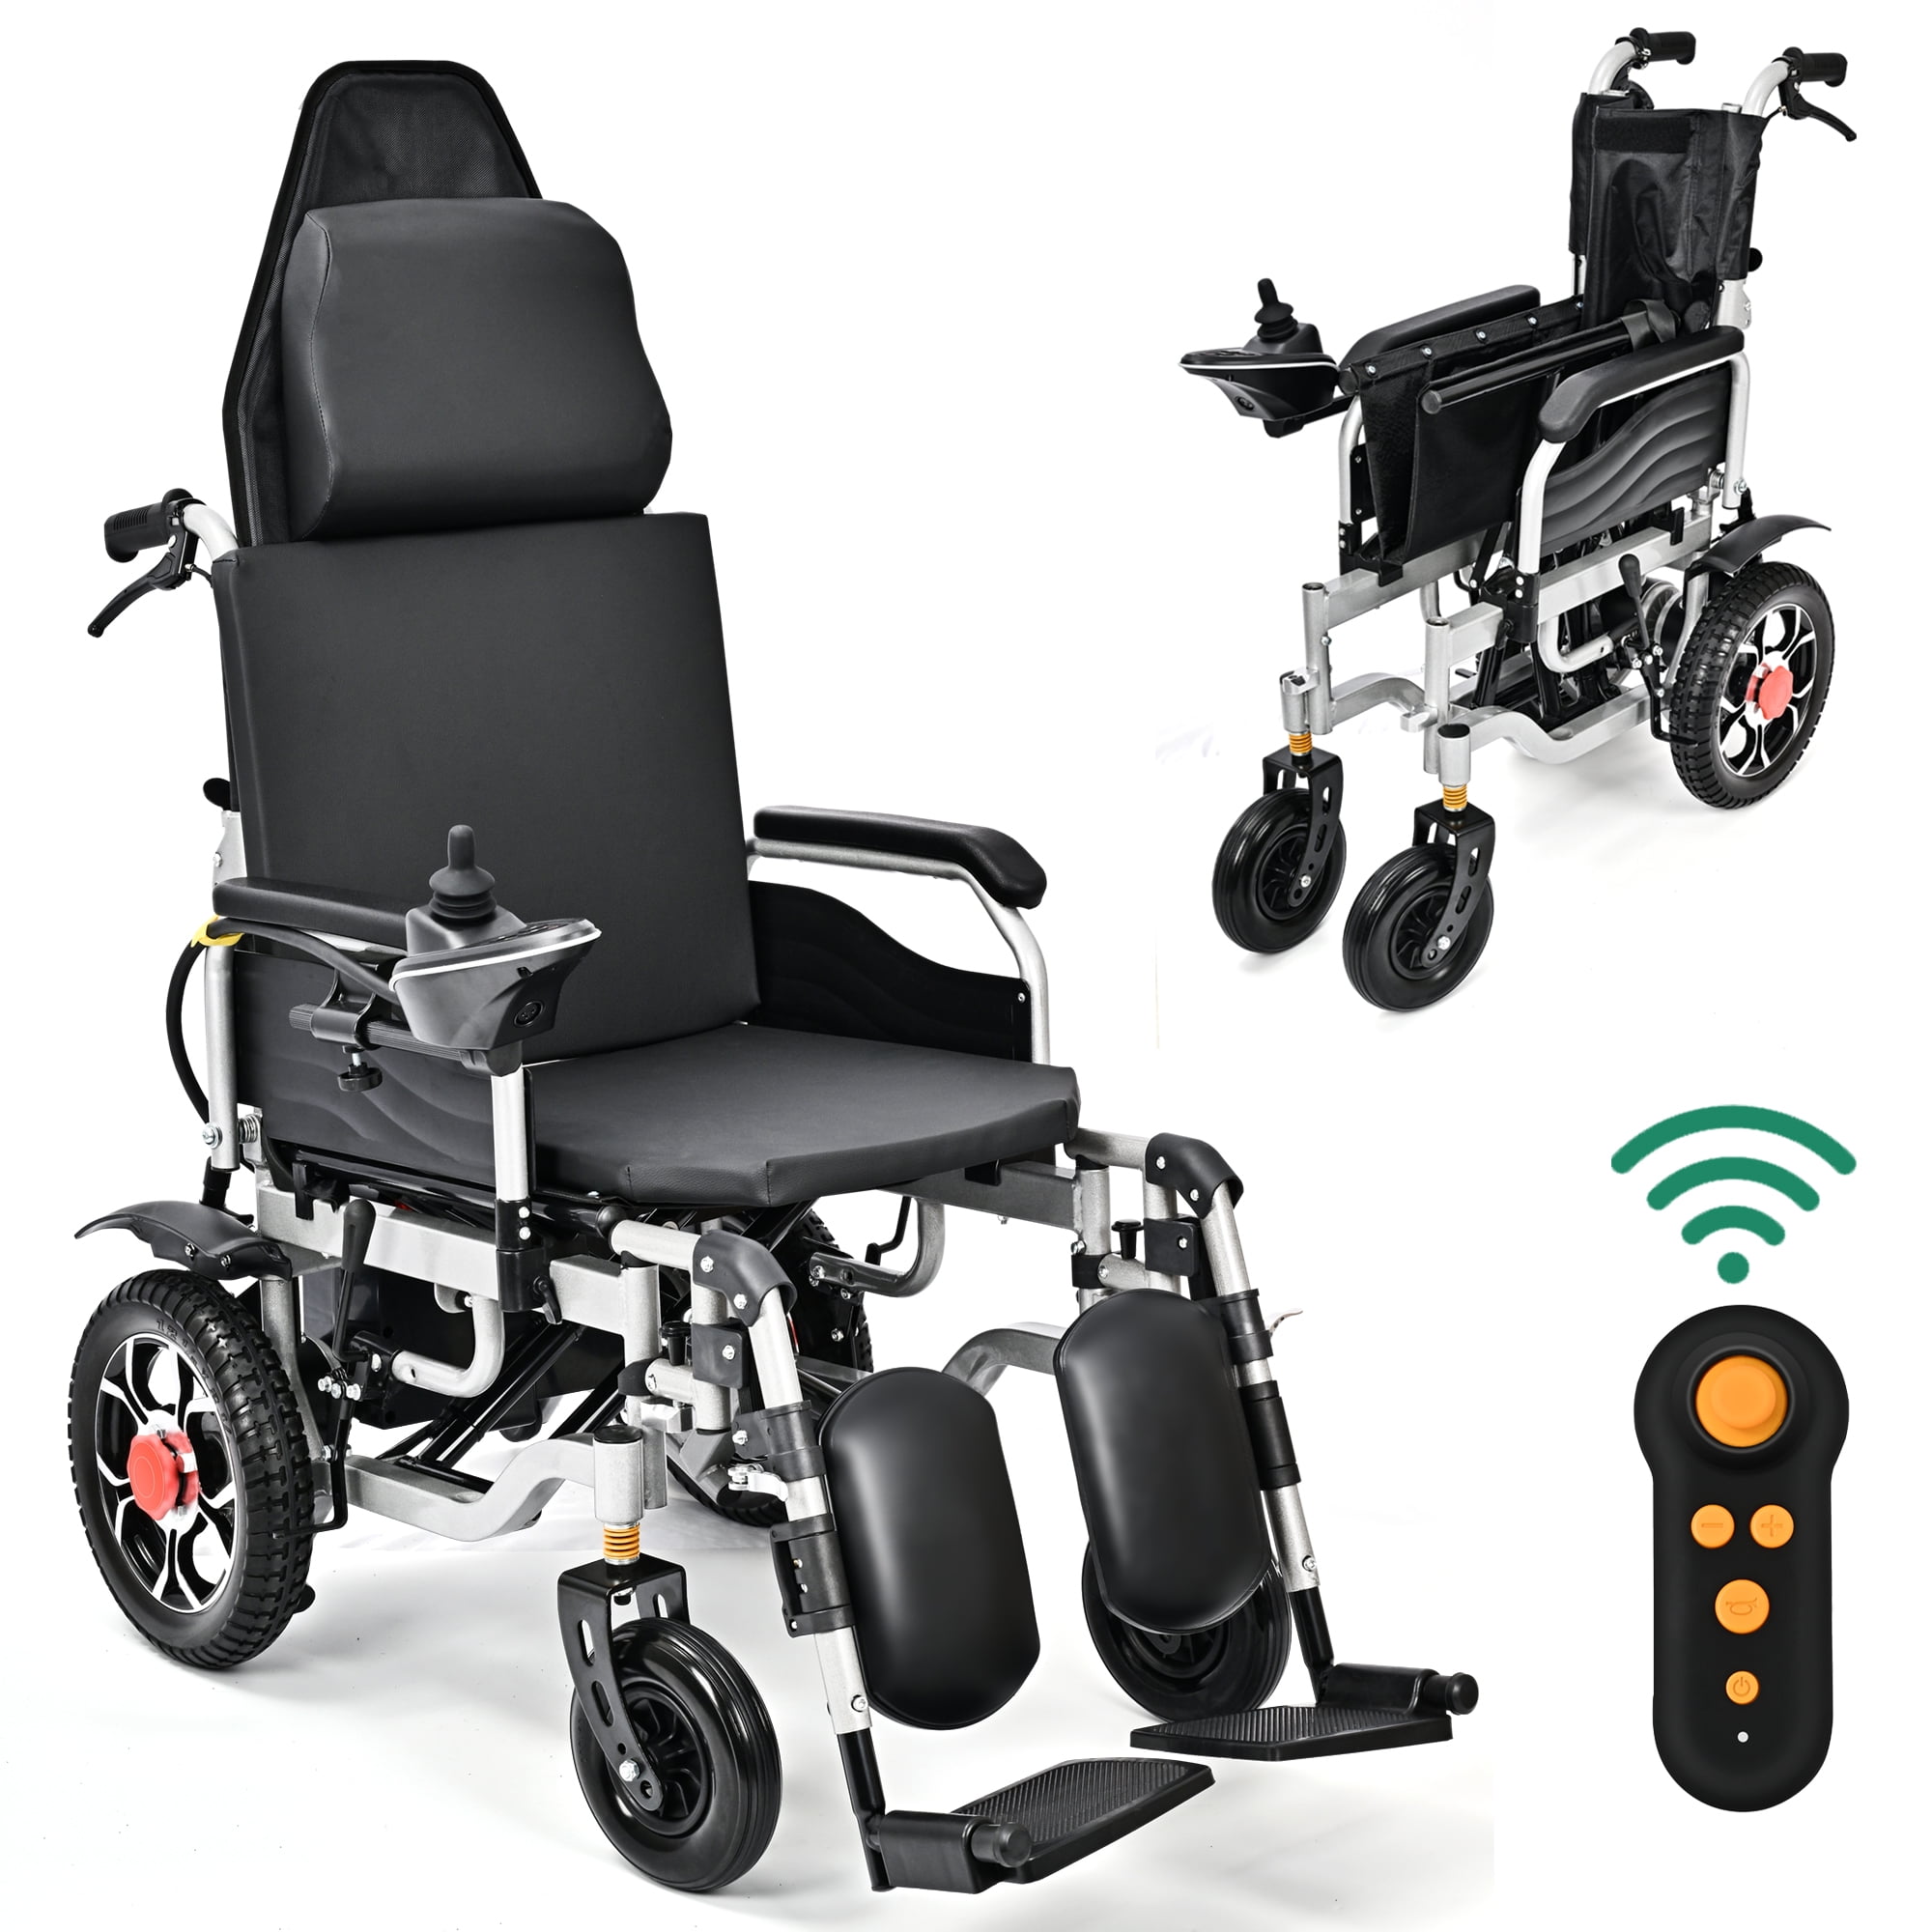 DIYAREA Portable Electric Wheelchair for Adults, Portable All Terrain  Lightweight Wheelchairs, Foldable Motorized Power Wheel Chair